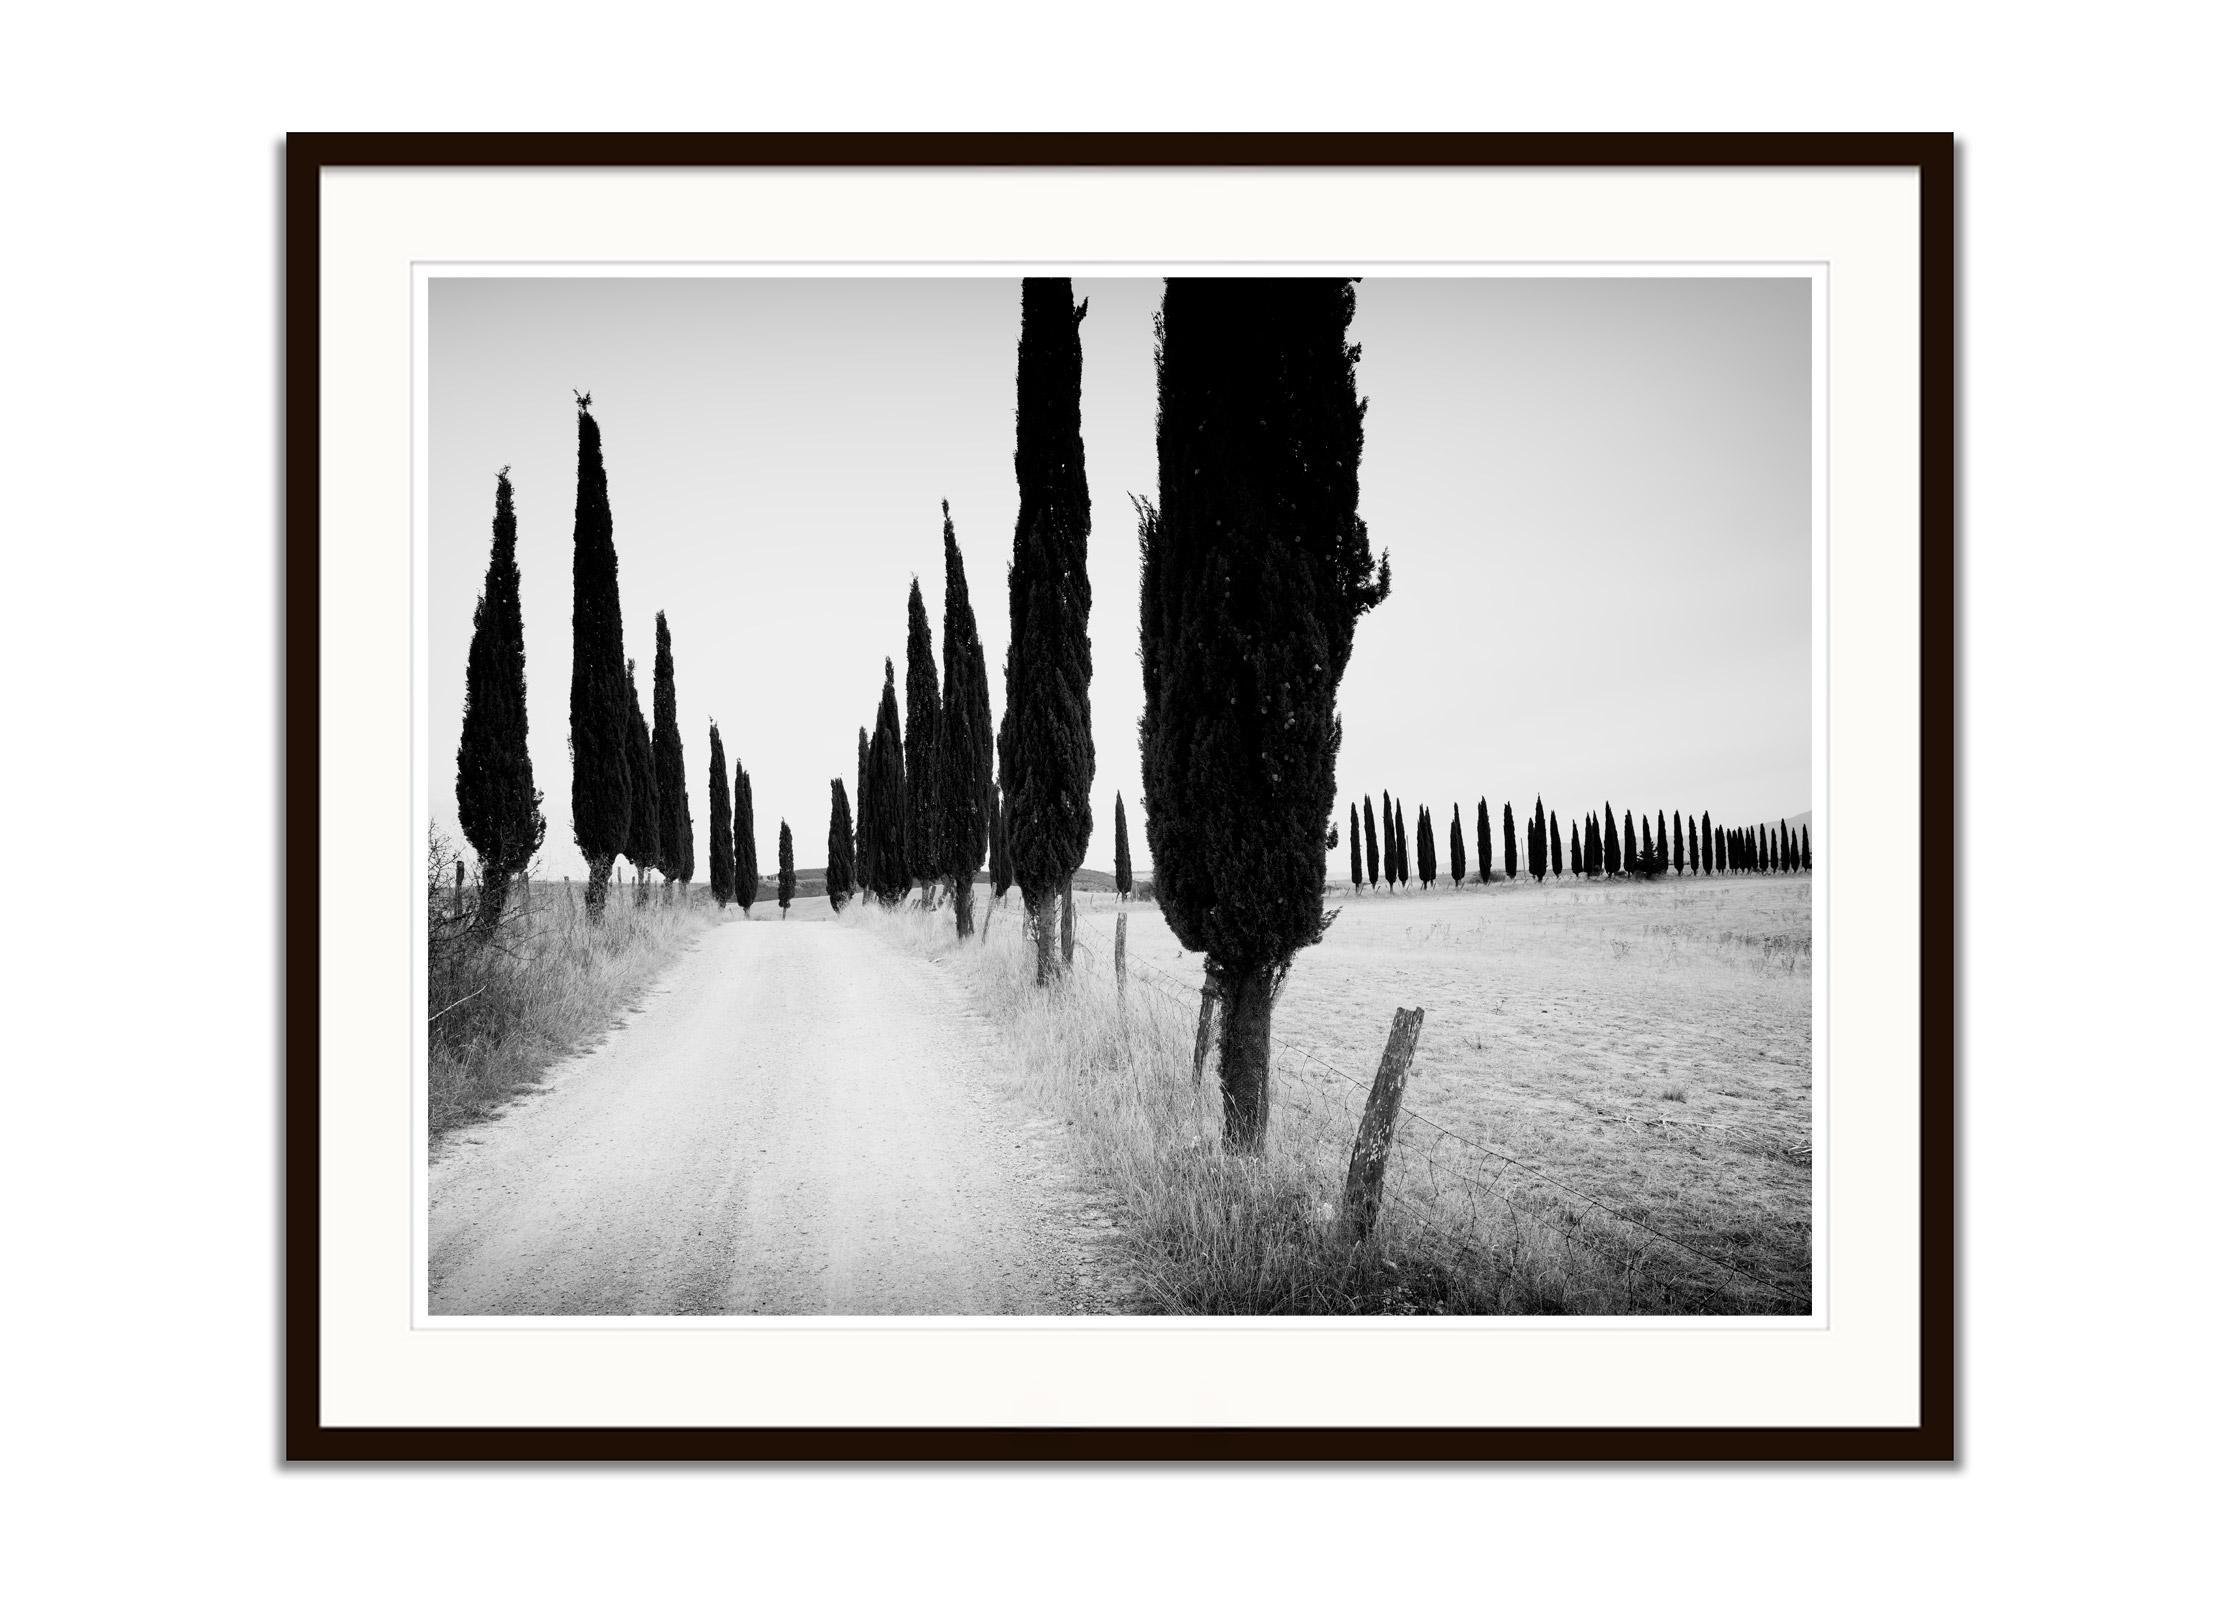 Cypress Tree Avenue, Tuscany, Italy, black and white photography, art landscape - Contemporary Photograph by Gerald Berghammer